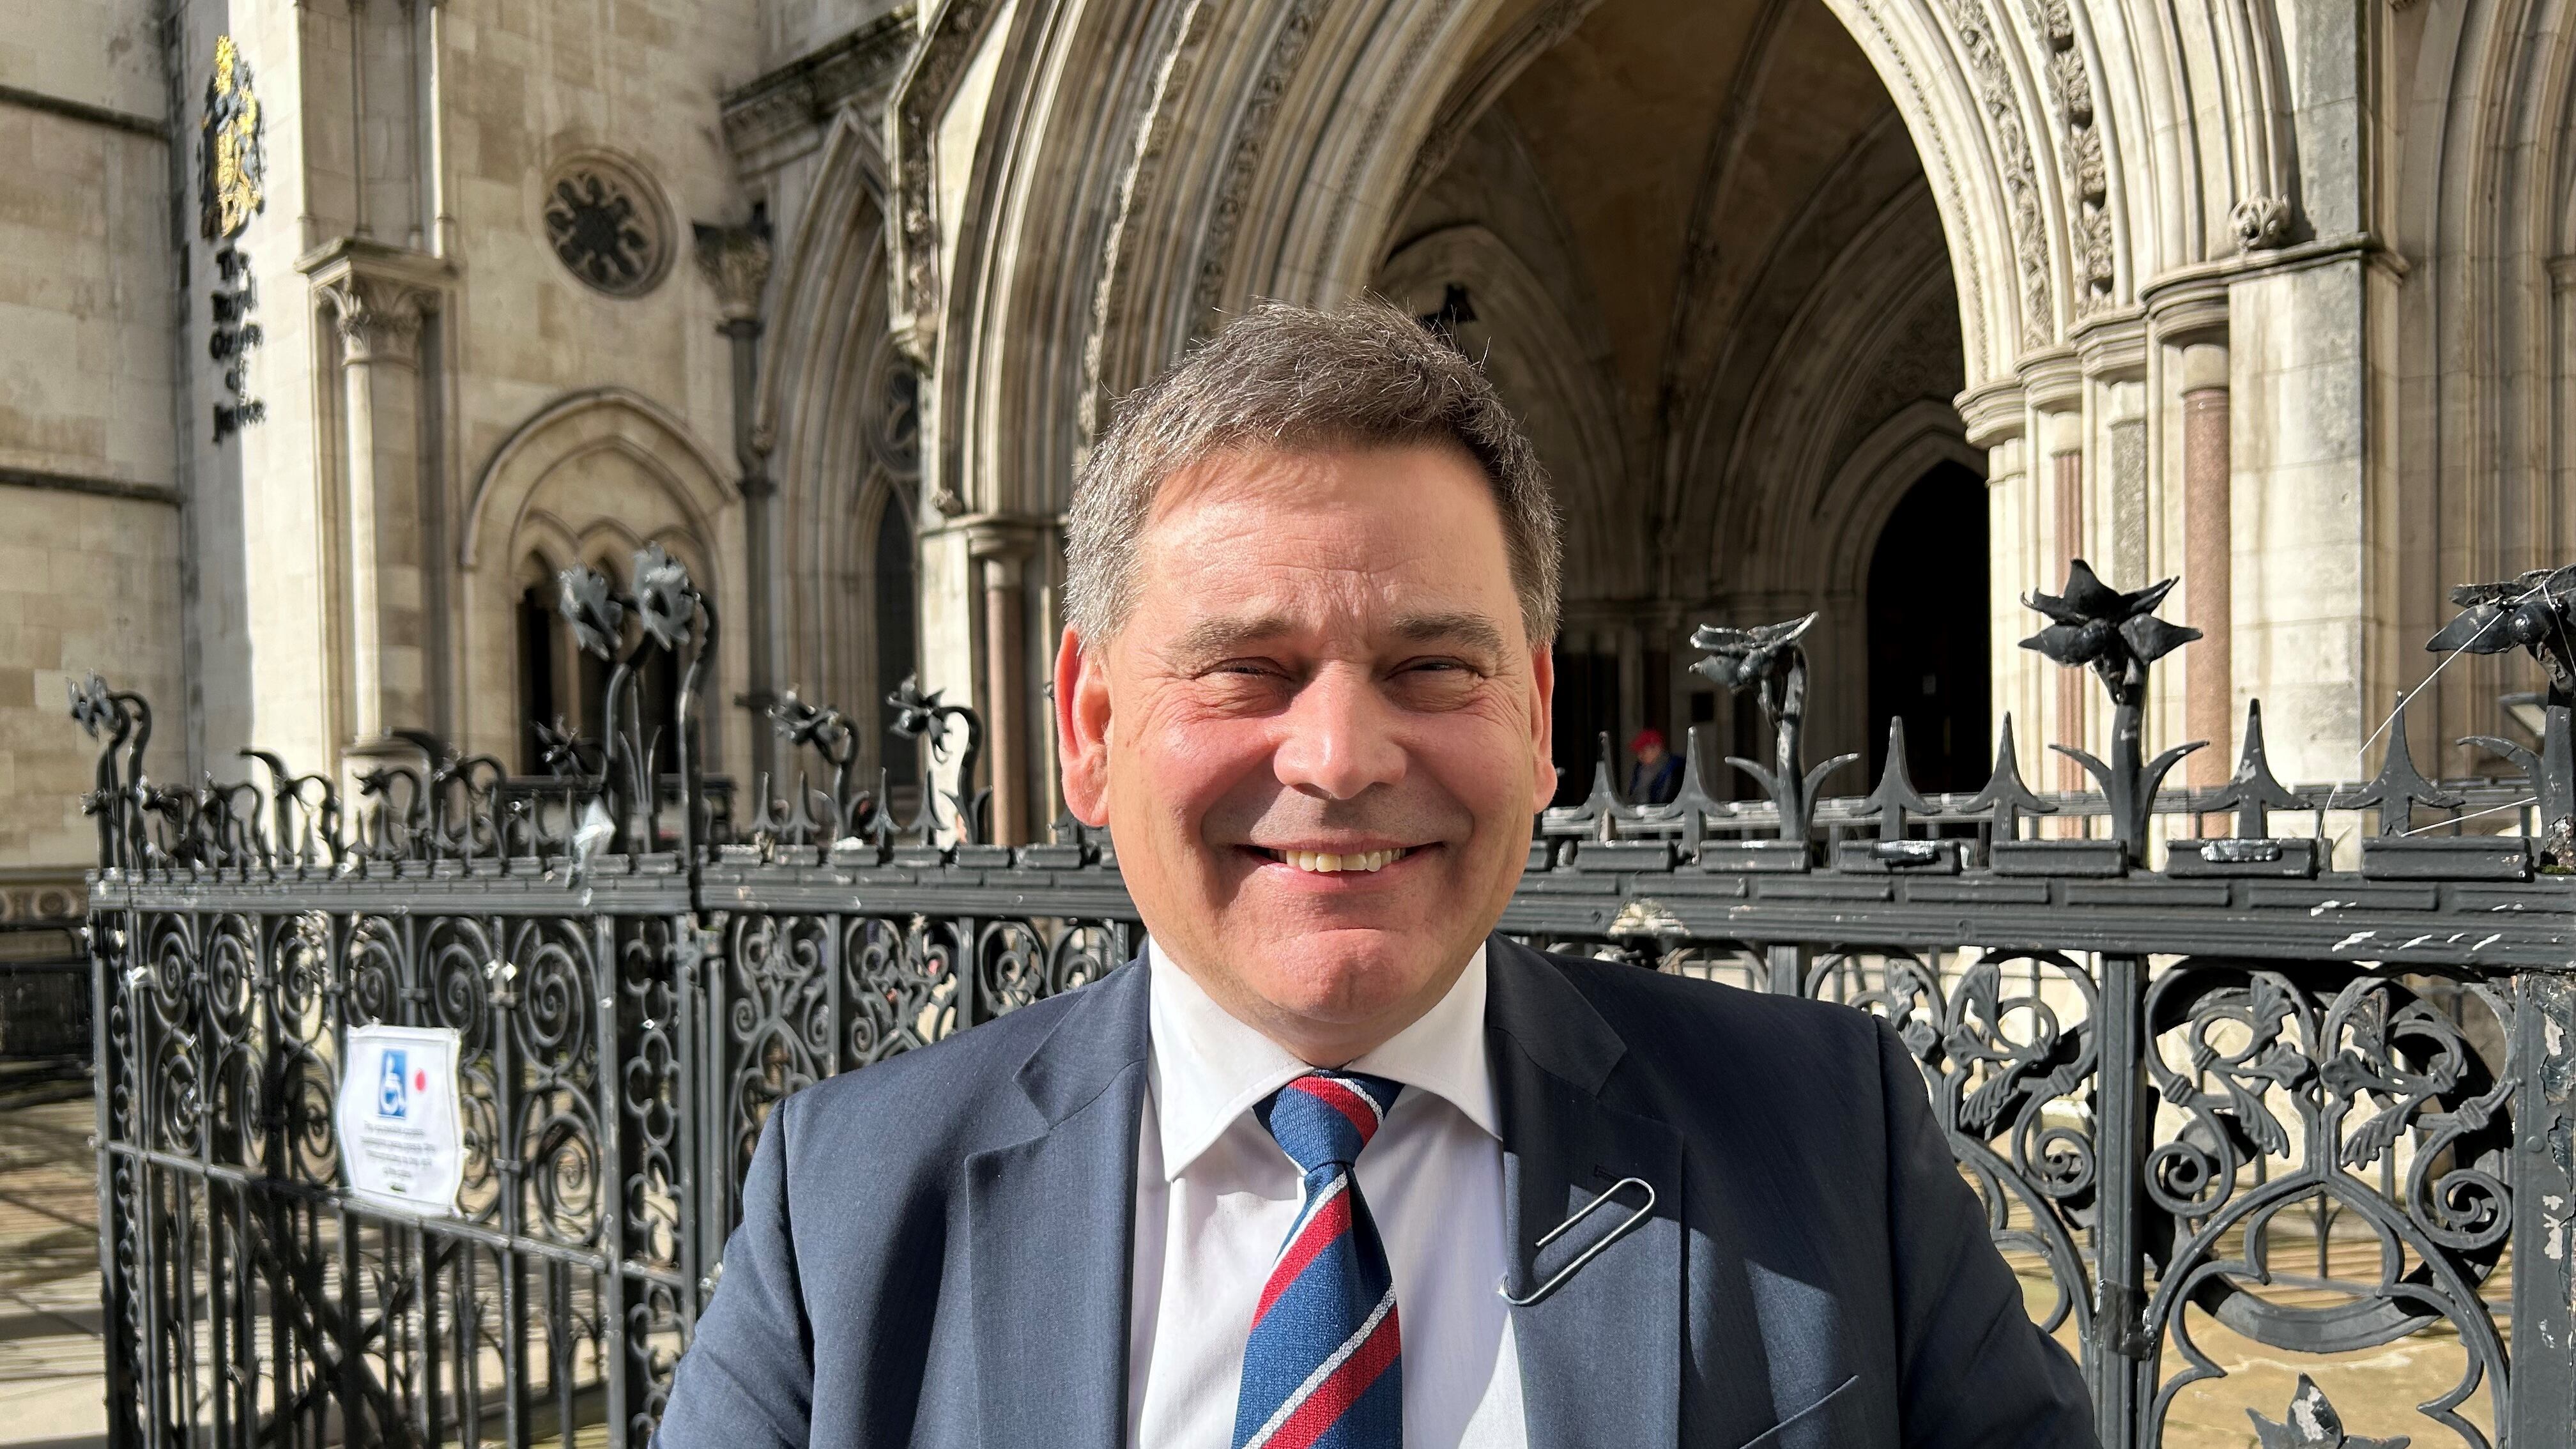 Former health secretary Matt Hancock libelled parliamentary candidate Andrew Bridgen to a ‘devastating extent’ by accusing him of antisemitism on social media, the High Court has been told